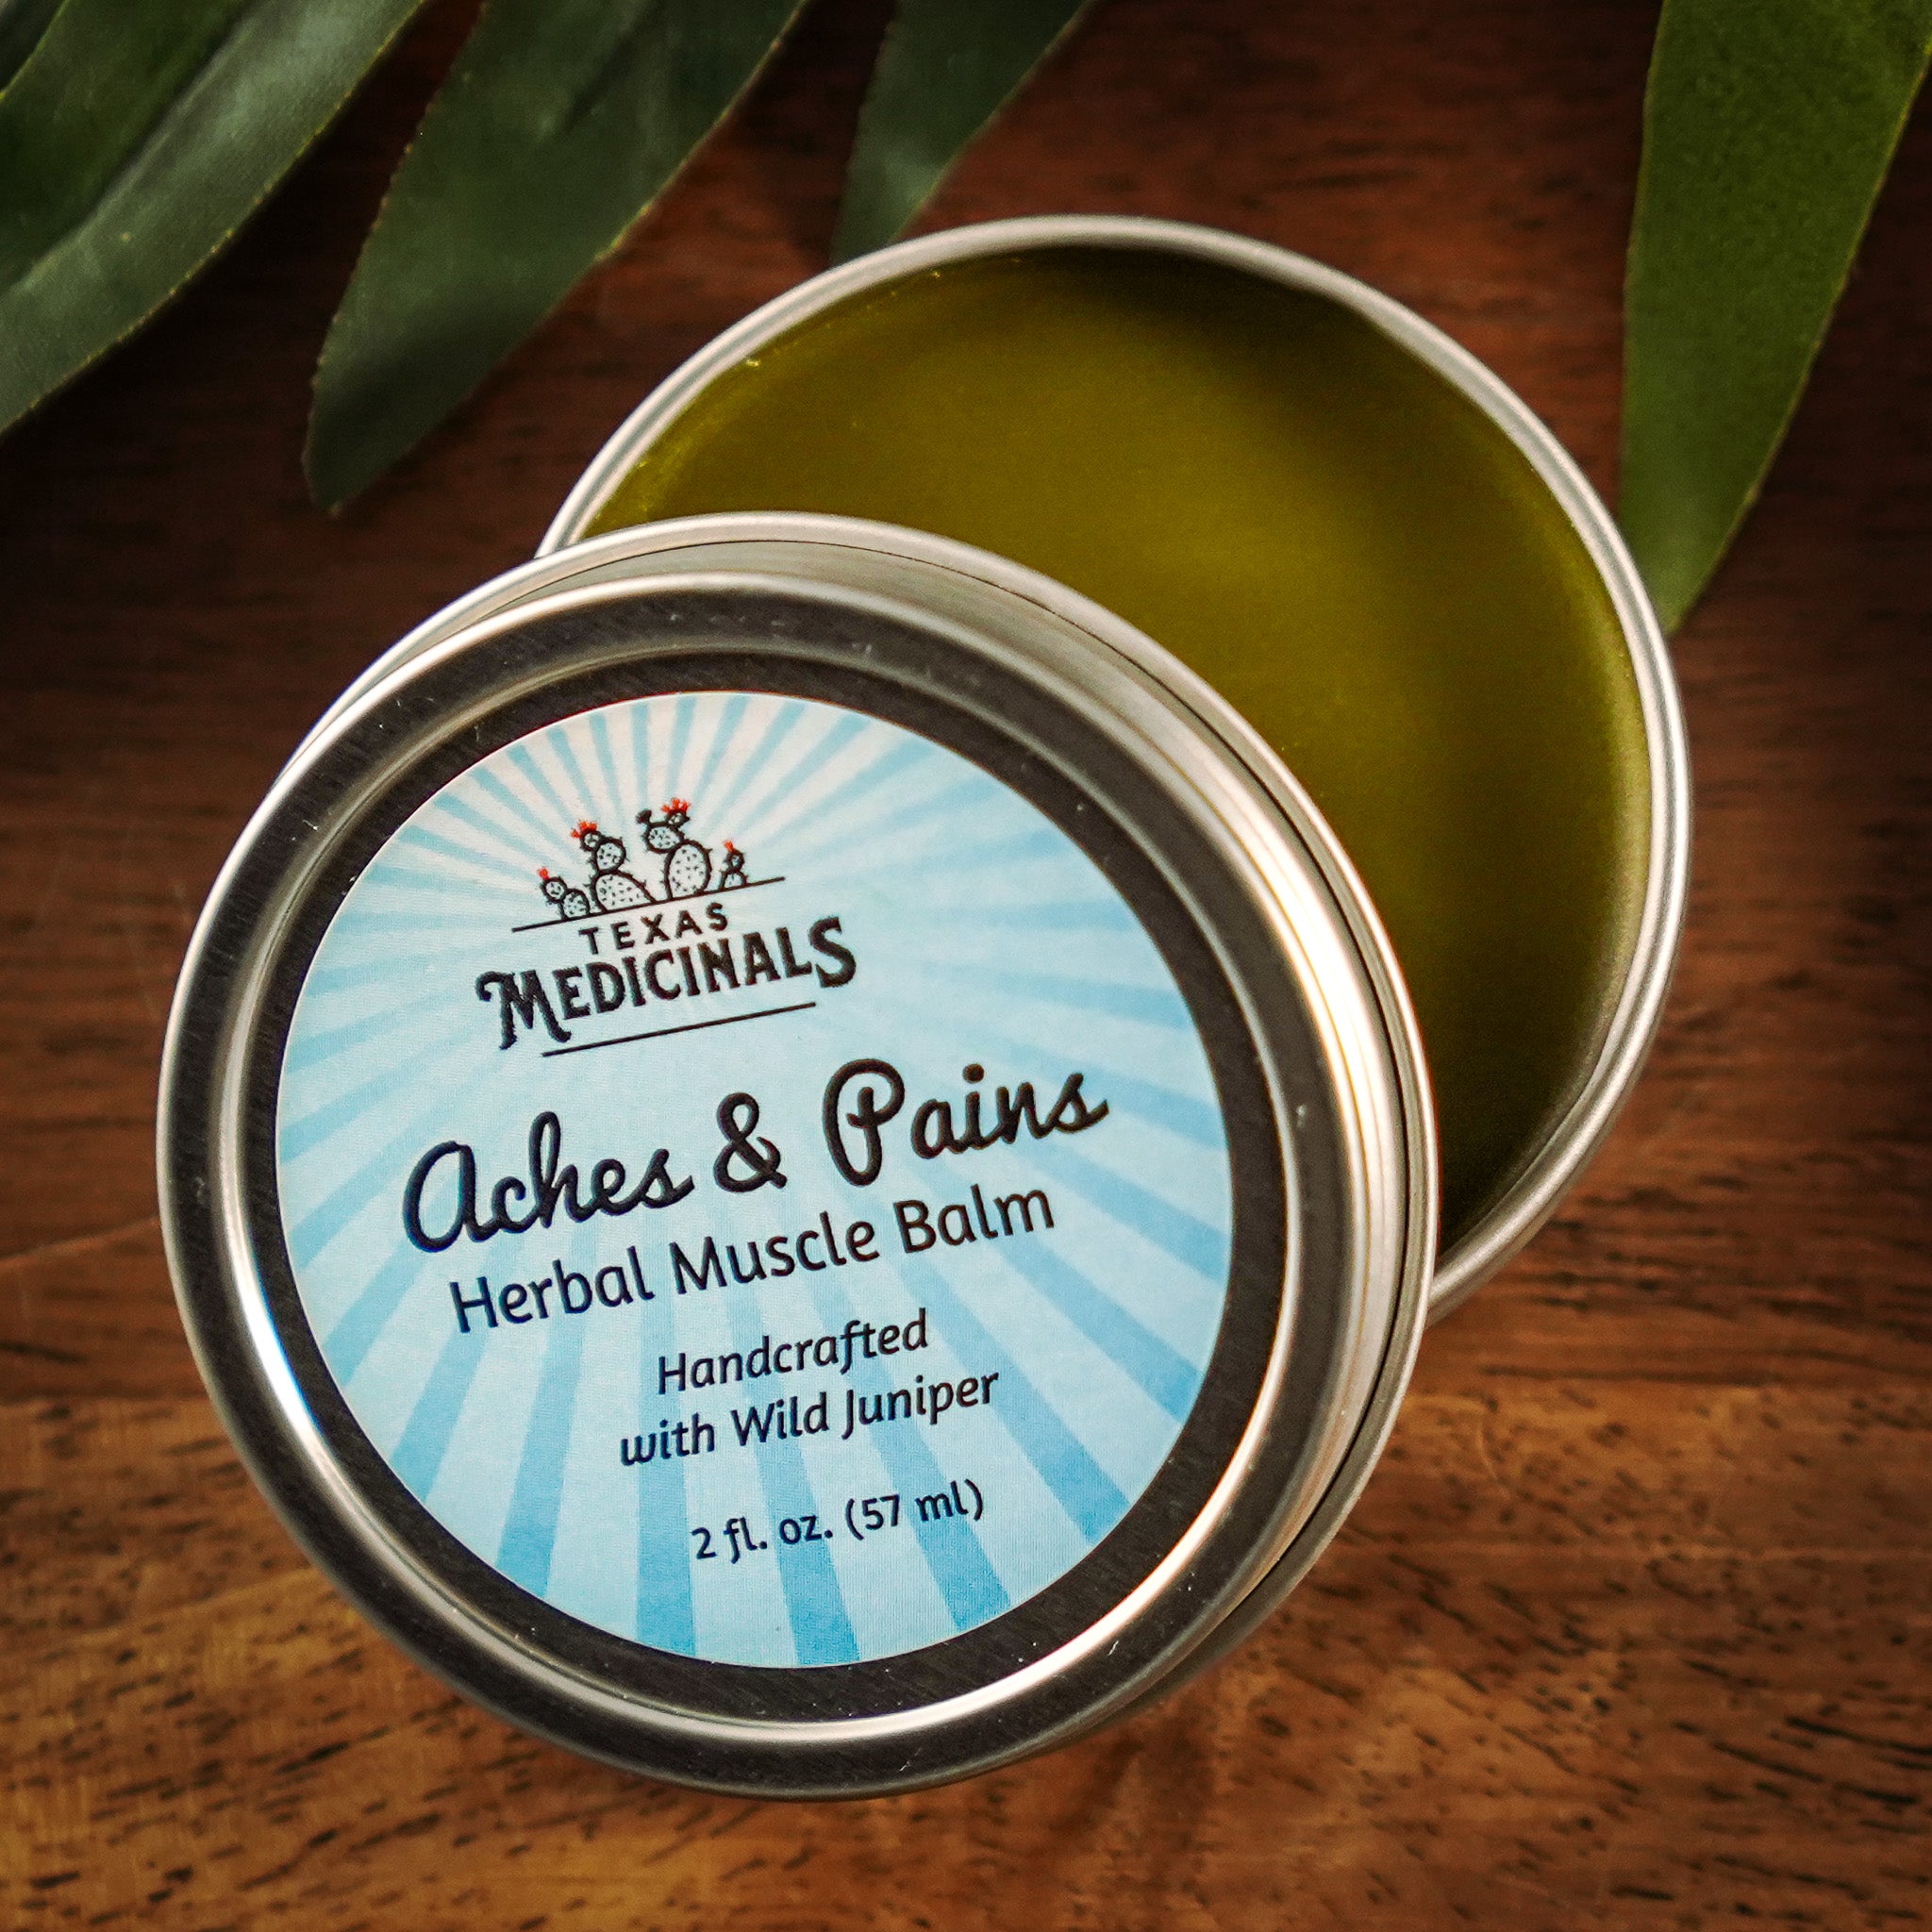 Aches & Pains Muscle Balm